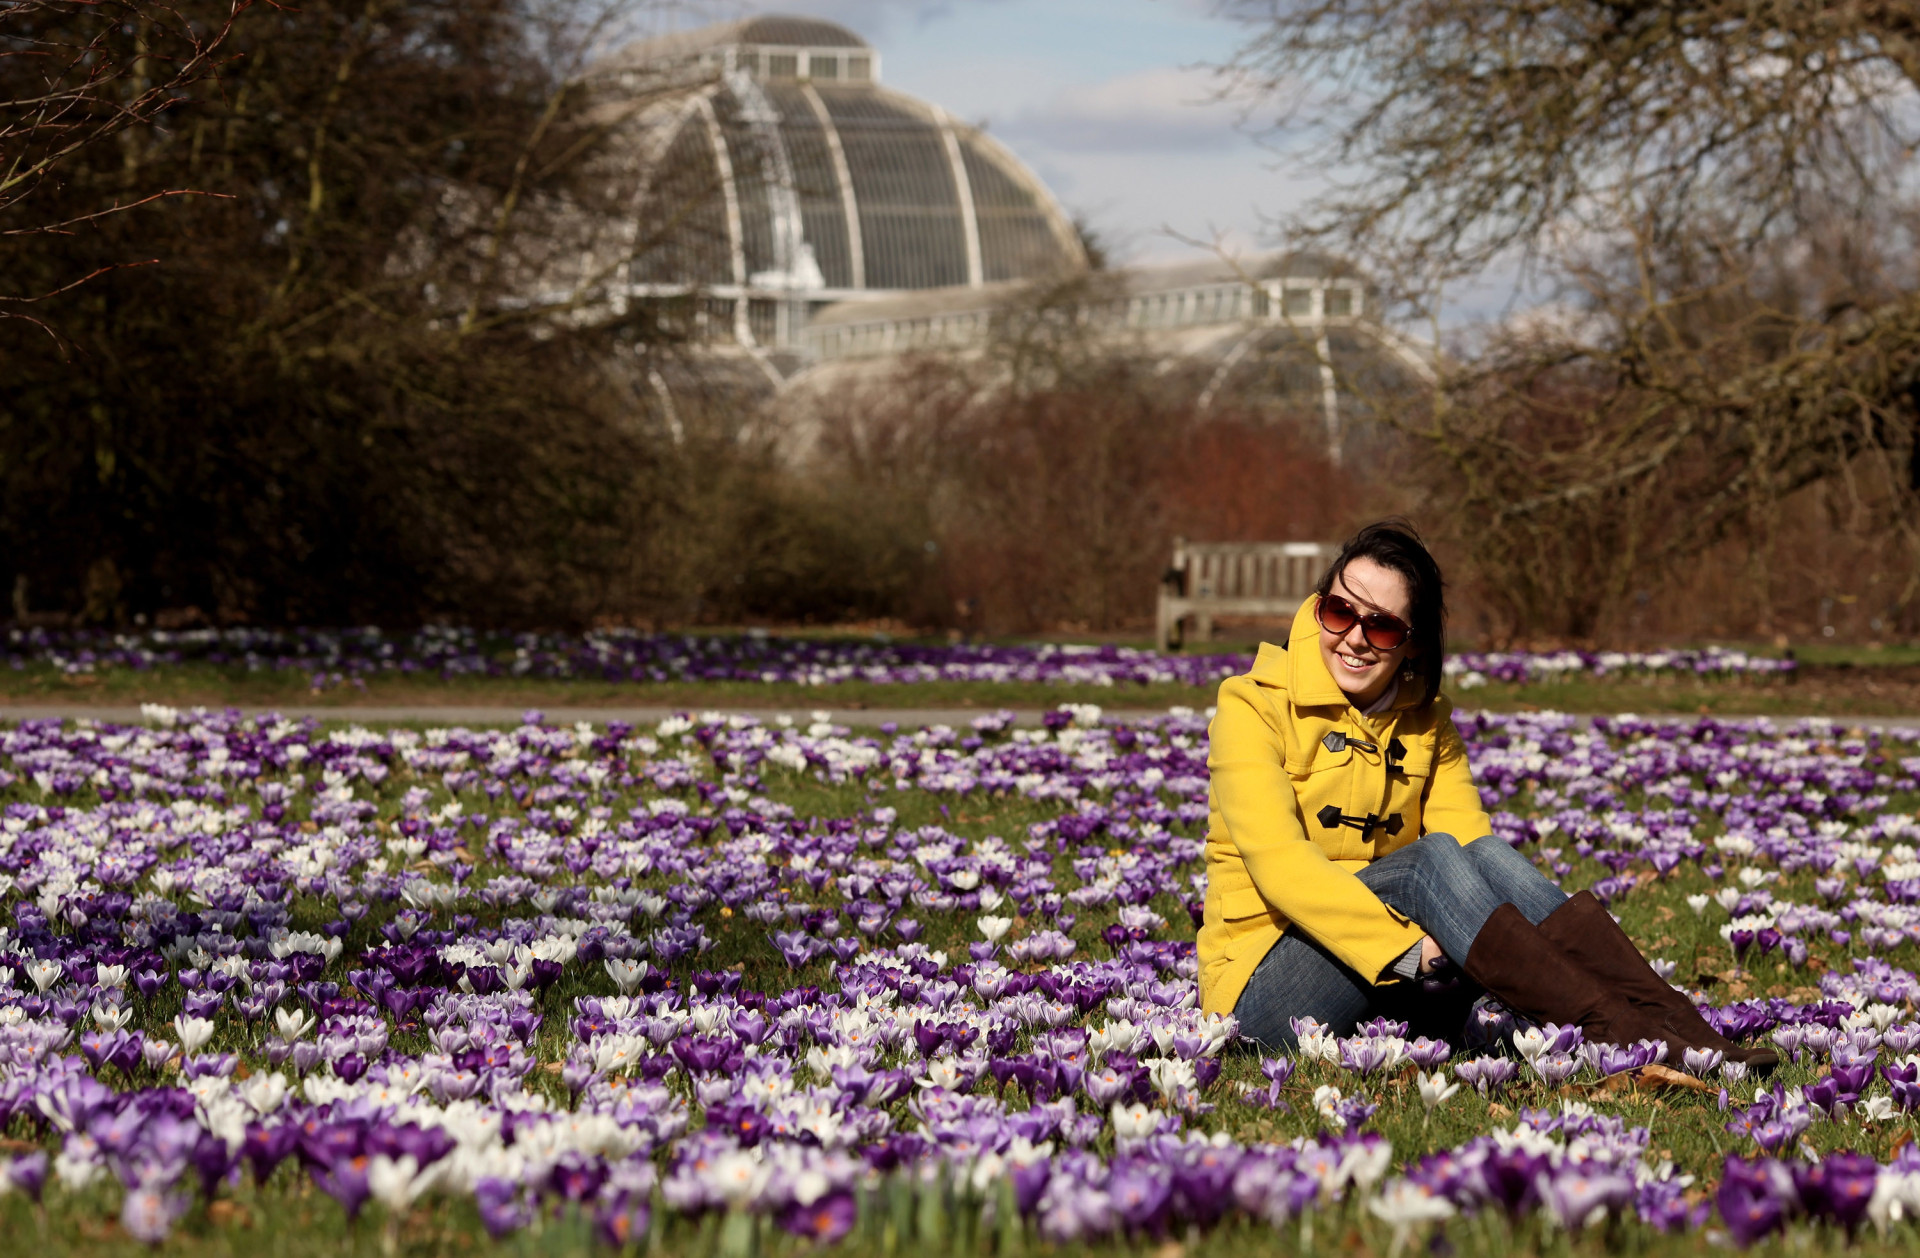 A carpet of crocuses flowering in the Royal Botanic Garden at Kew Gardens in London. <p><a href="https://www.msn.com/en-us/community/channel/vid-7xx8mnucu55yw63we9va2gwr7uihbxwc68fxqp25x6tg4ftibpra?cvid=94631541bc0f4f89bfd59158d696ad7e">Follow us and access great exclusive content every day</a></p>